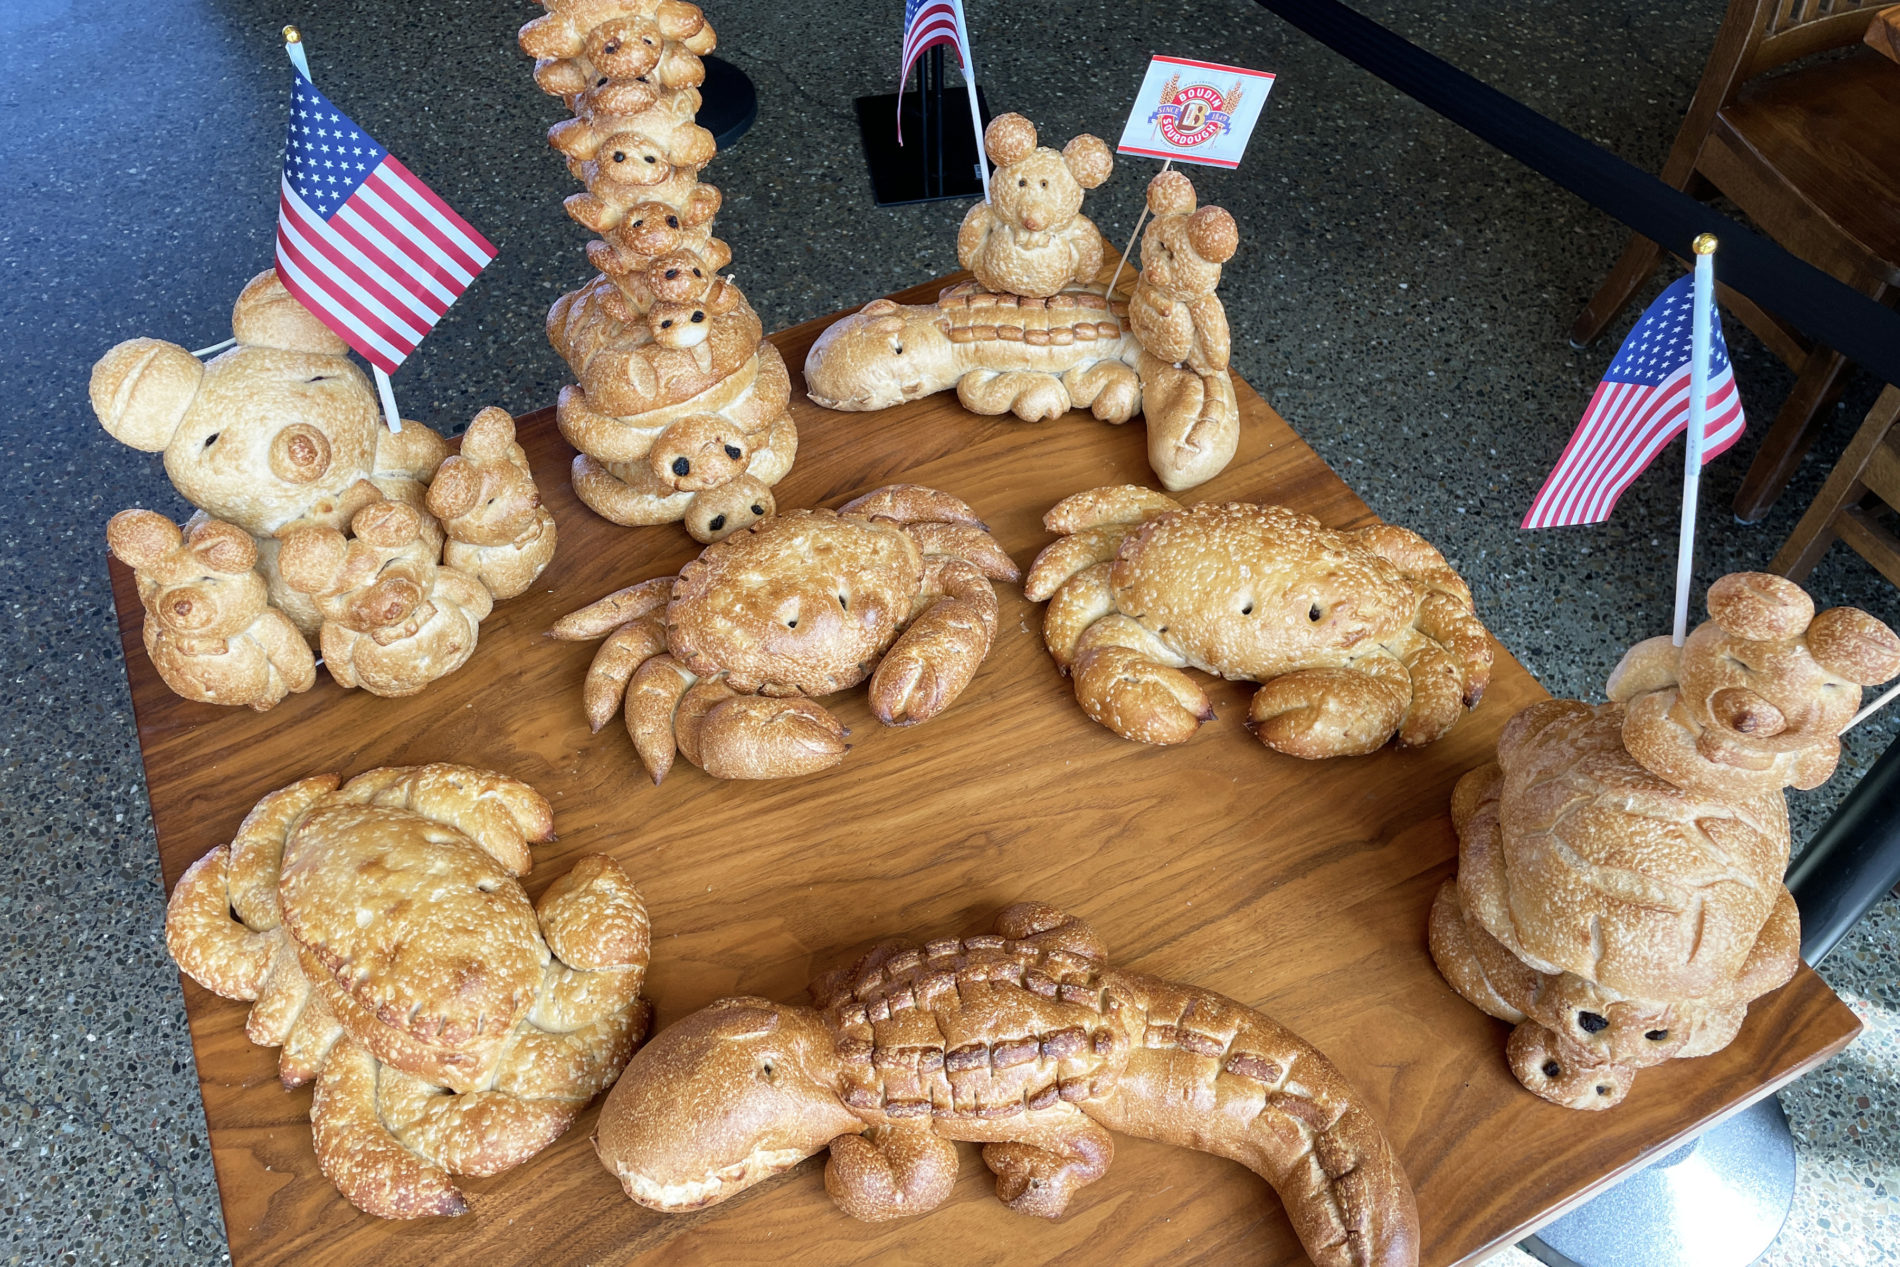 Boudin Bakery at Fisherman’s Wharf displays whimsical loaves of sourdough bread.